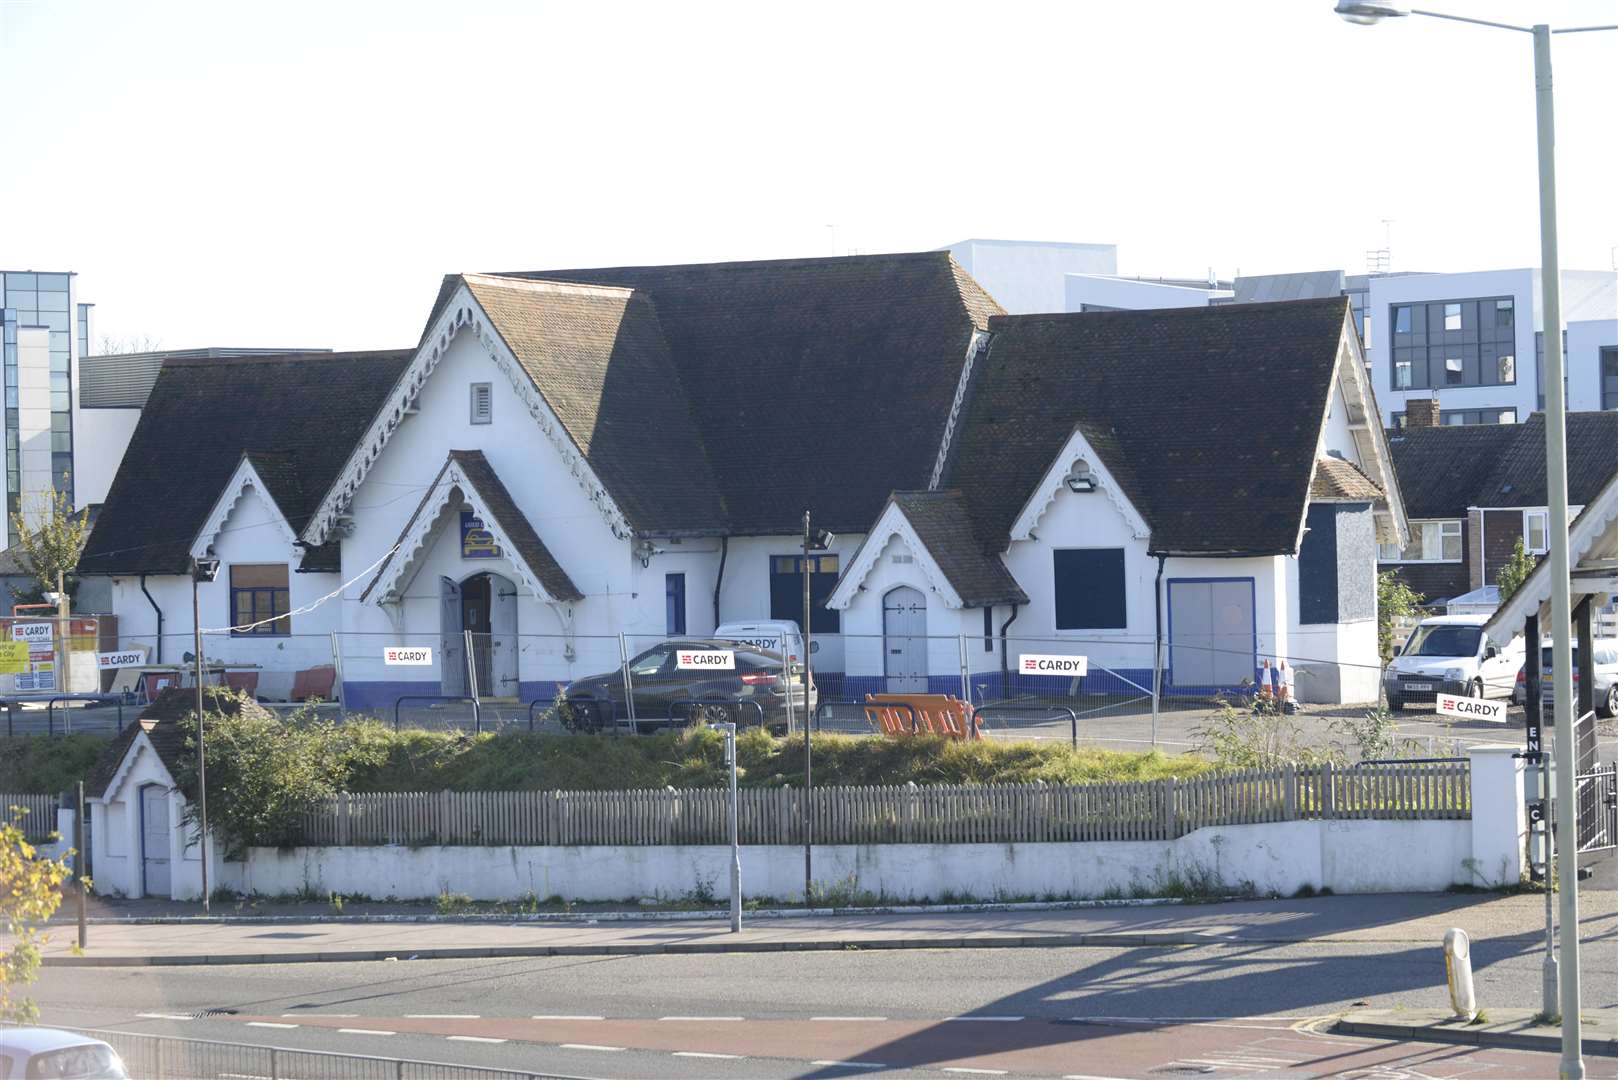 The former St Mary Bredin School previously stood at the site